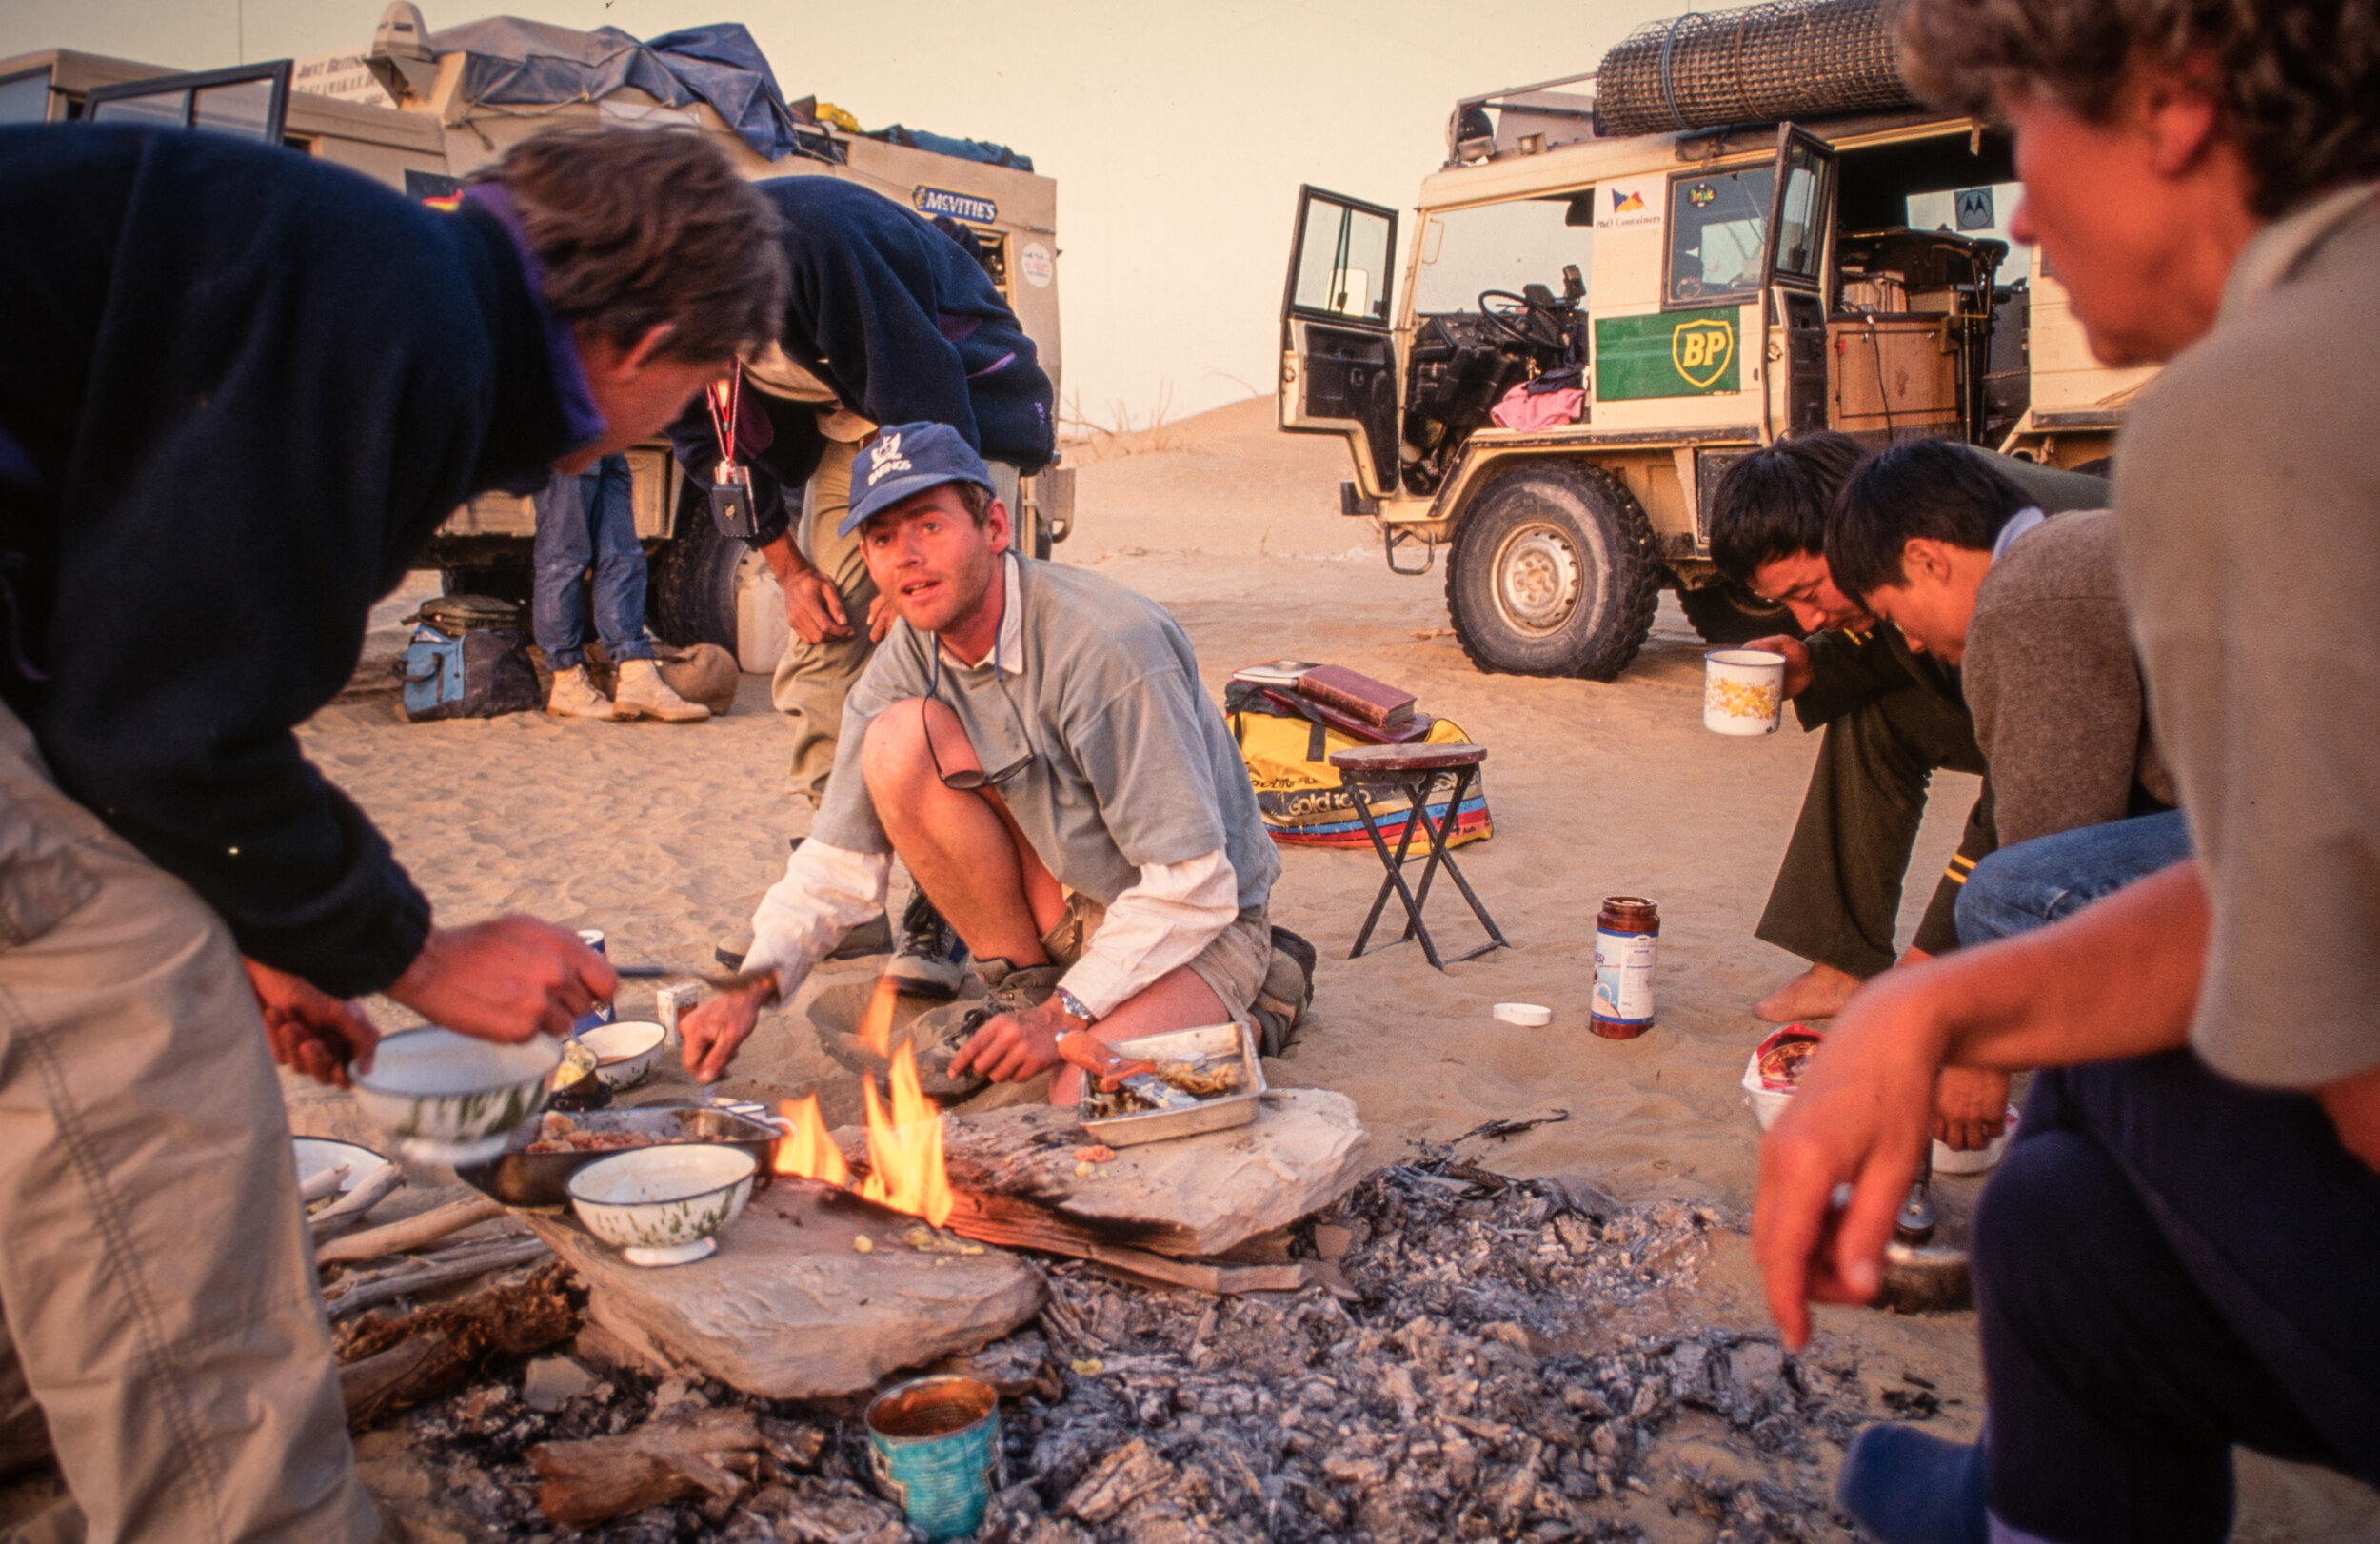  Paul Treasure cooking up a storm on his desert mud stove.  